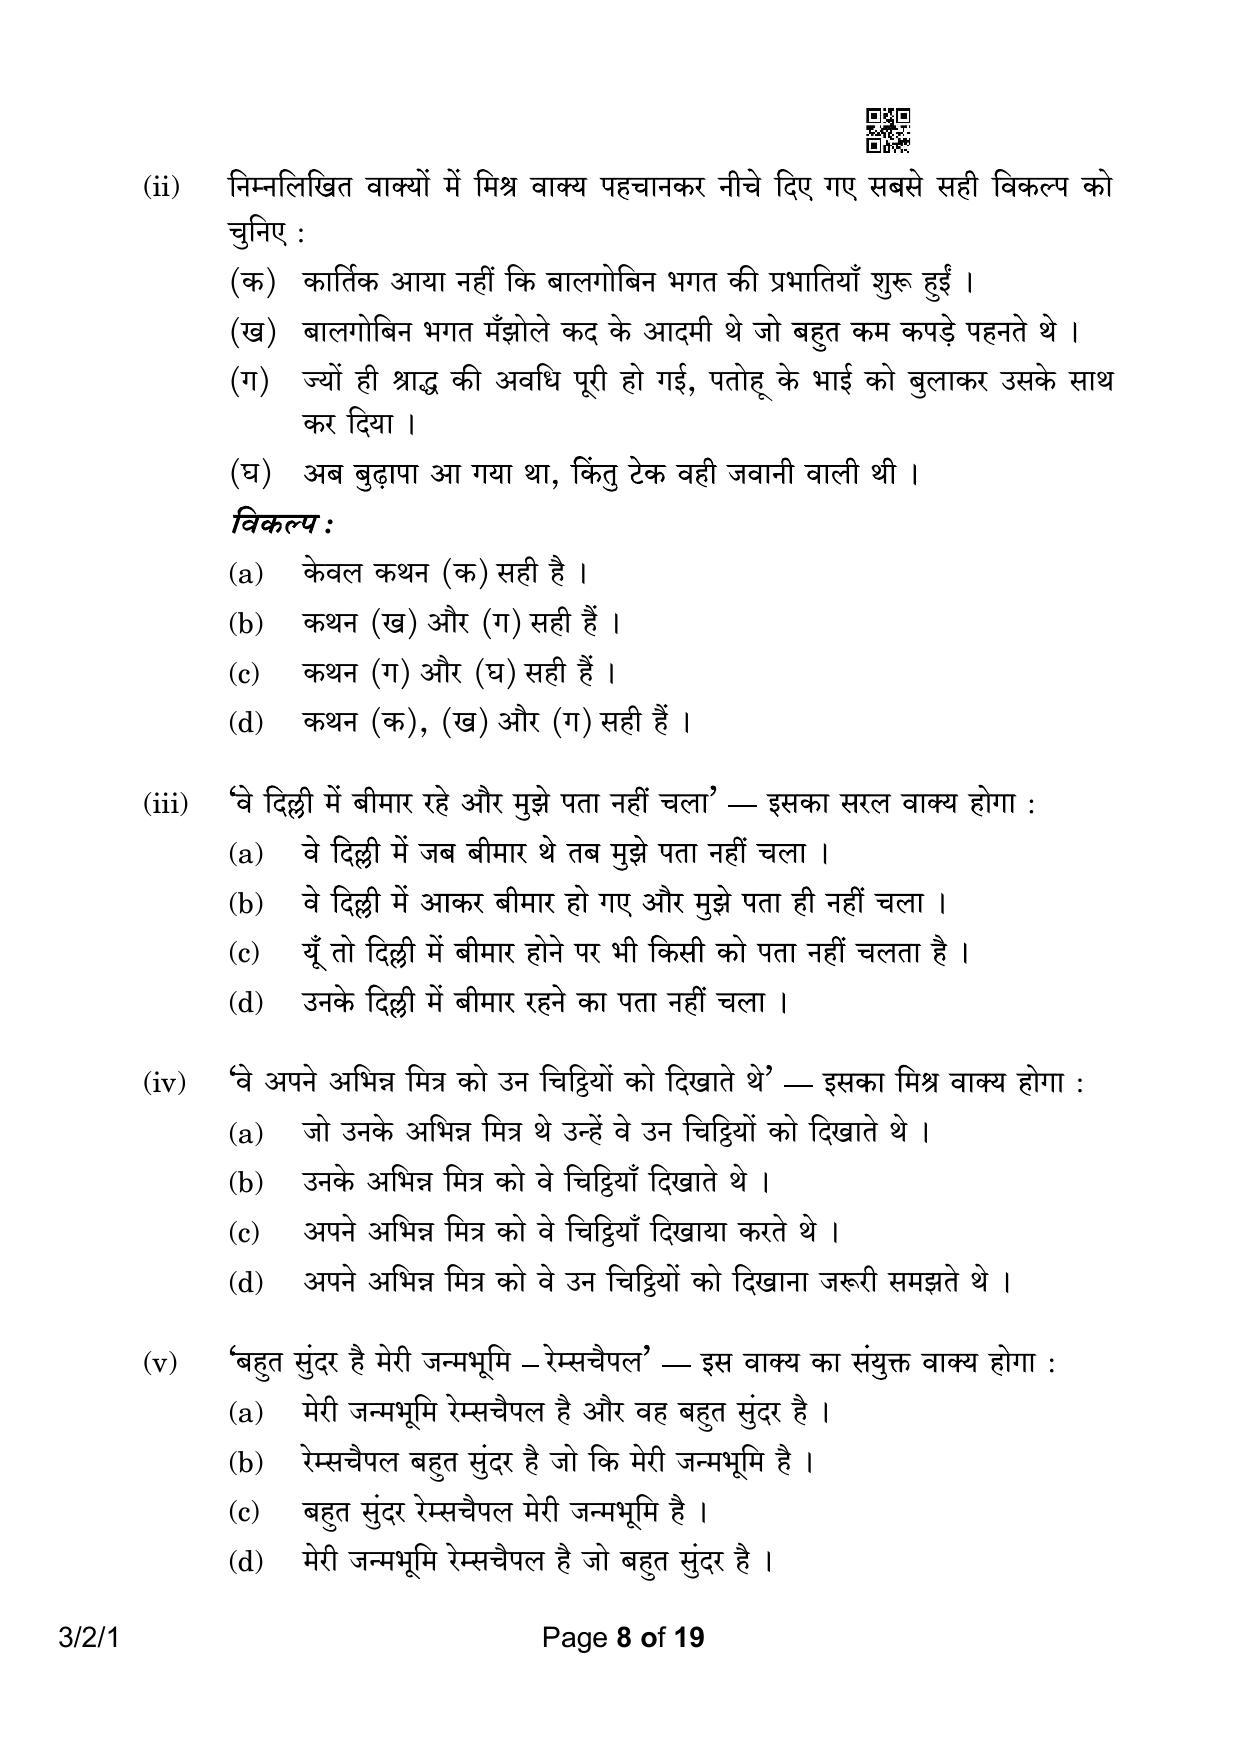 CBSE Class 10 3-2-1 Hindi A 2023 Question Paper - Page 8